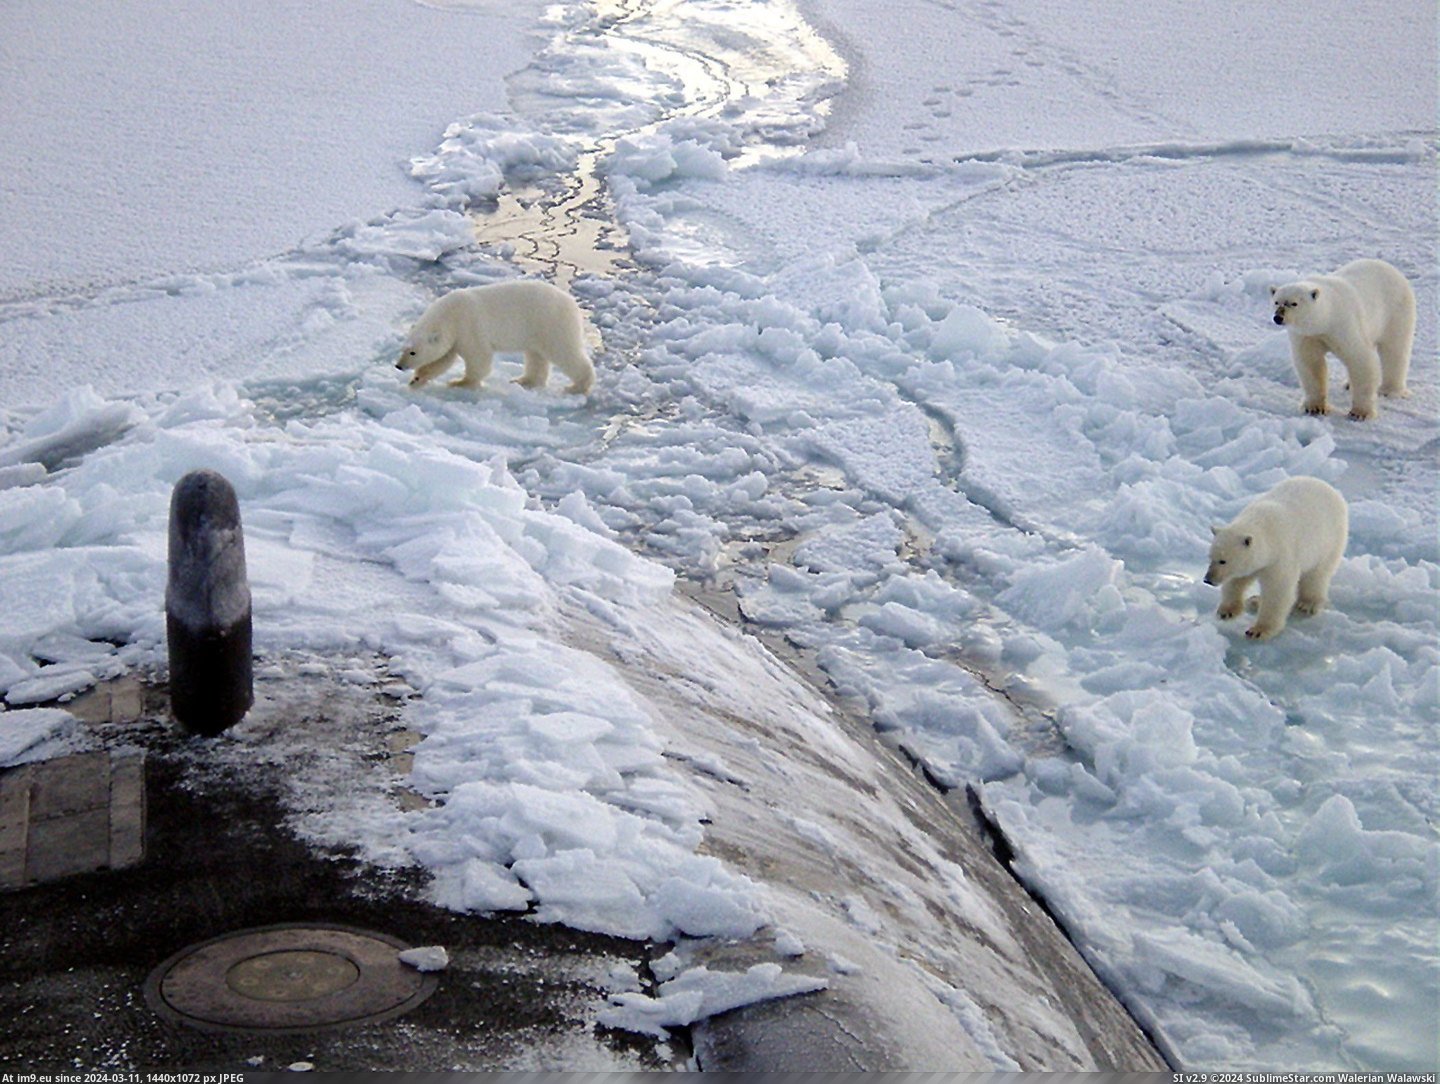 #Out #Polar #Submarine #Uss #Honolulu #Checking #Bears [Pics] Polar bears checking out the USS Honolulu submarine Pic. (Image of album My r/PICS favs))